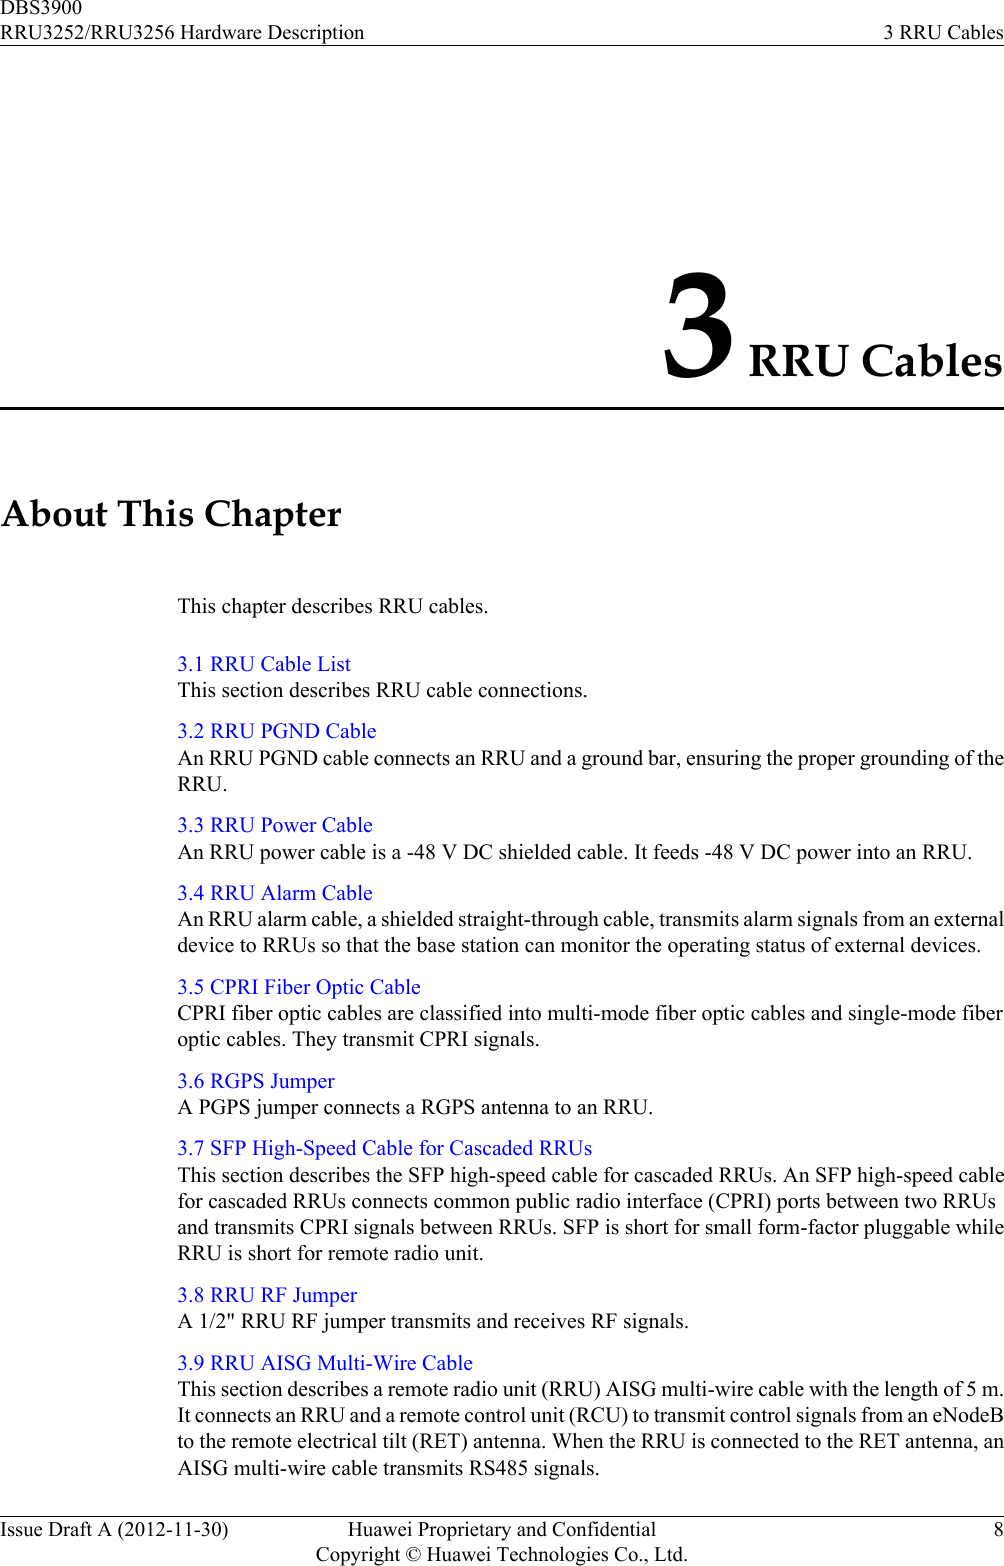 3 RRU CablesAbout This ChapterThis chapter describes RRU cables.3.1 RRU Cable ListThis section describes RRU cable connections.3.2 RRU PGND CableAn RRU PGND cable connects an RRU and a ground bar, ensuring the proper grounding of theRRU.3.3 RRU Power CableAn RRU power cable is a -48 V DC shielded cable. It feeds -48 V DC power into an RRU.3.4 RRU Alarm CableAn RRU alarm cable, a shielded straight-through cable, transmits alarm signals from an externaldevice to RRUs so that the base station can monitor the operating status of external devices.3.5 CPRI Fiber Optic CableCPRI fiber optic cables are classified into multi-mode fiber optic cables and single-mode fiberoptic cables. They transmit CPRI signals.3.6 RGPS JumperA PGPS jumper connects a RGPS antenna to an RRU.3.7 SFP High-Speed Cable for Cascaded RRUsThis section describes the SFP high-speed cable for cascaded RRUs. An SFP high-speed cablefor cascaded RRUs connects common public radio interface (CPRI) ports between two RRUsand transmits CPRI signals between RRUs. SFP is short for small form-factor pluggable whileRRU is short for remote radio unit.3.8 RRU RF JumperA 1/2&quot; RRU RF jumper transmits and receives RF signals.3.9 RRU AISG Multi-Wire CableThis section describes a remote radio unit (RRU) AISG multi-wire cable with the length of 5 m.It connects an RRU and a remote control unit (RCU) to transmit control signals from an eNodeBto the remote electrical tilt (RET) antenna. When the RRU is connected to the RET antenna, anAISG multi-wire cable transmits RS485 signals.DBS3900RRU3252/RRU3256 Hardware Description 3 RRU CablesIssue Draft A (2012-11-30) Huawei Proprietary and ConfidentialCopyright © Huawei Technologies Co., Ltd.8